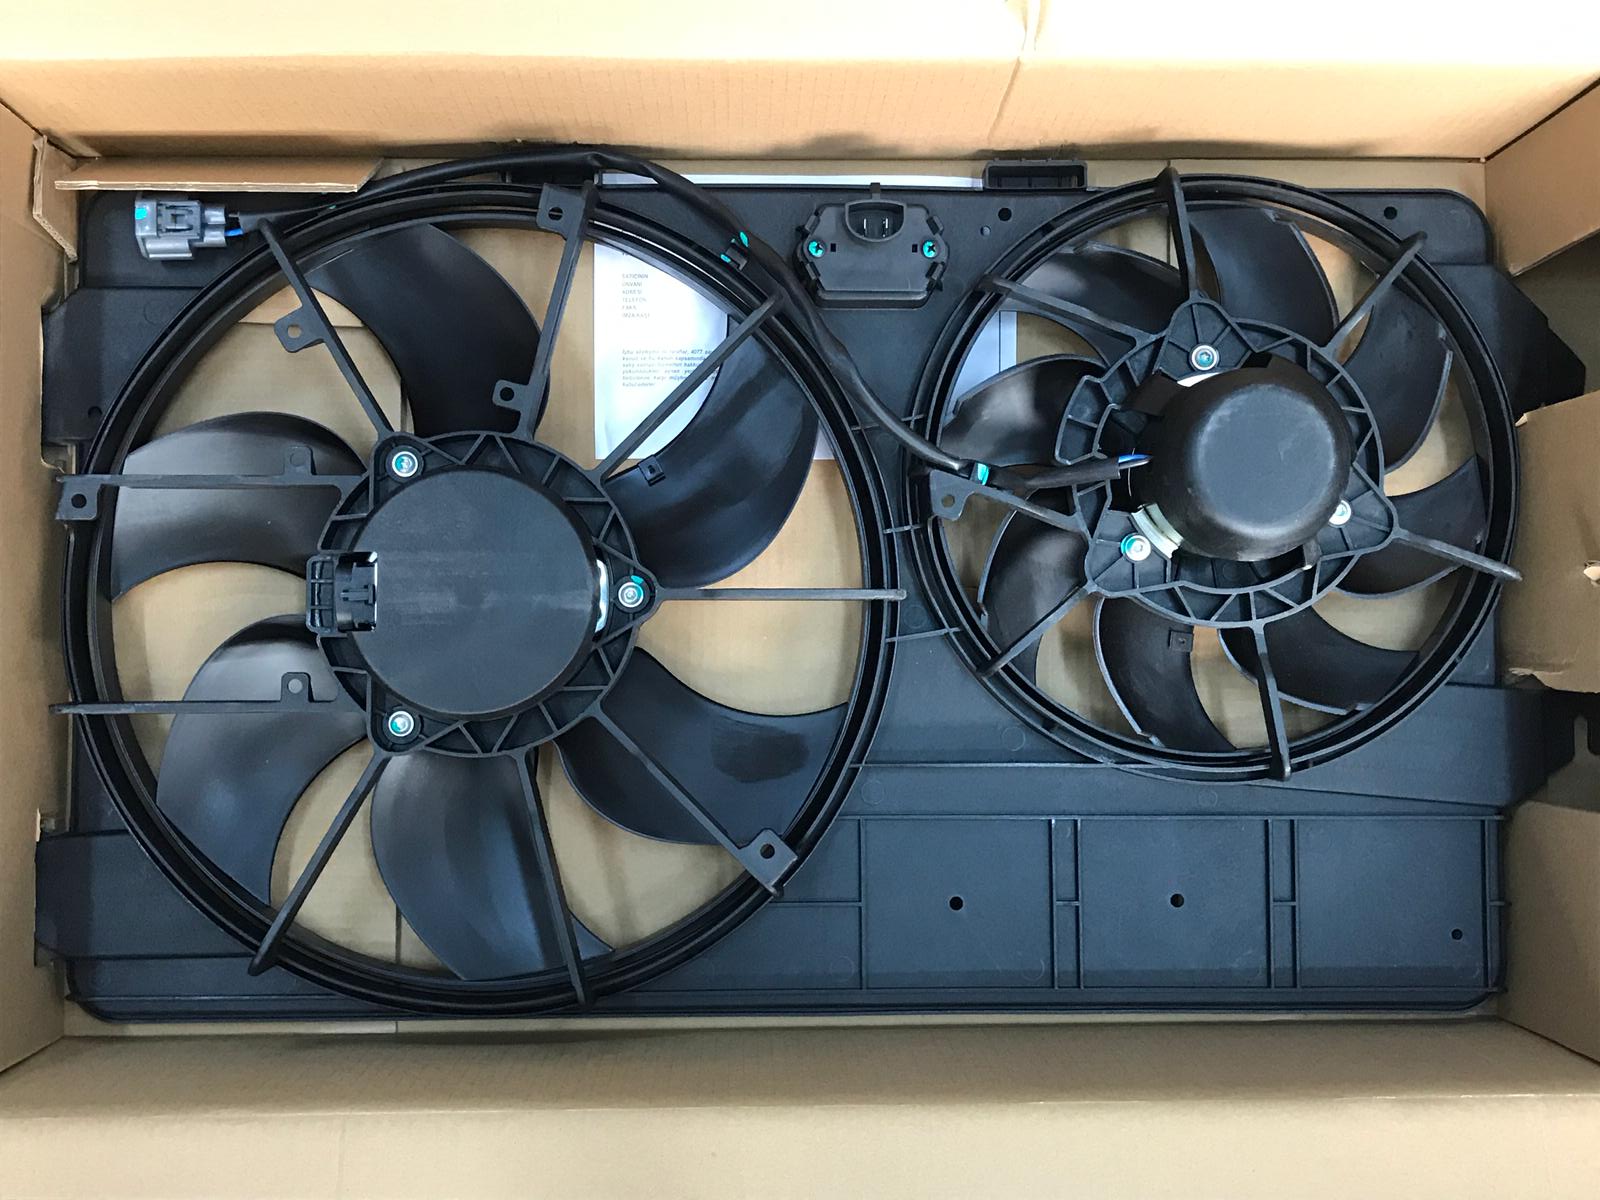 2013 transit connect fan motor only works in high